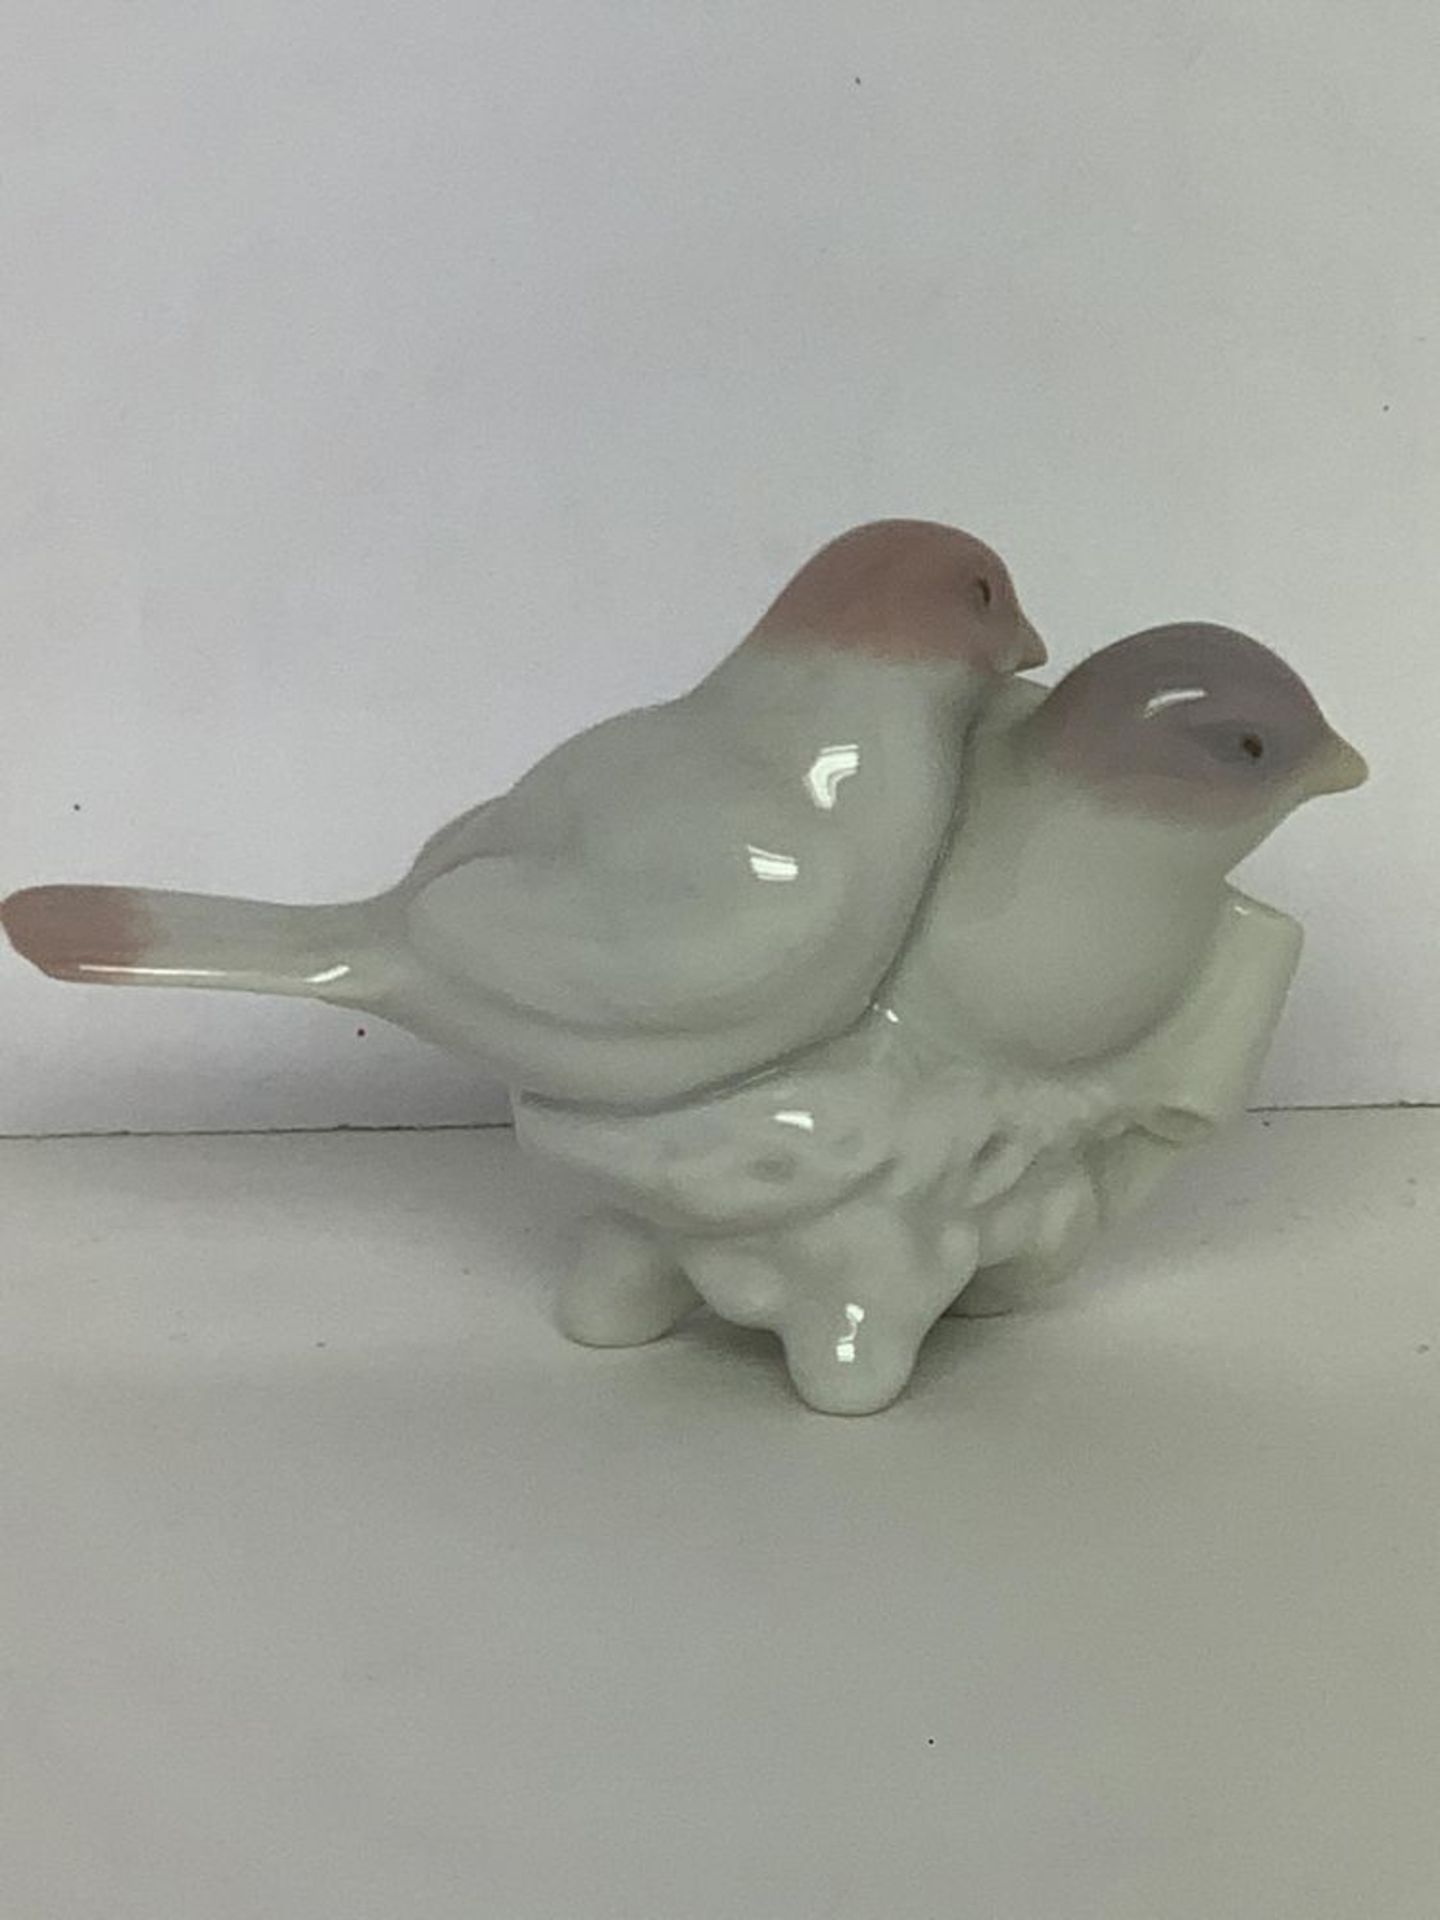 Lladro Collectable Bird Ornament - Image 2 of 4